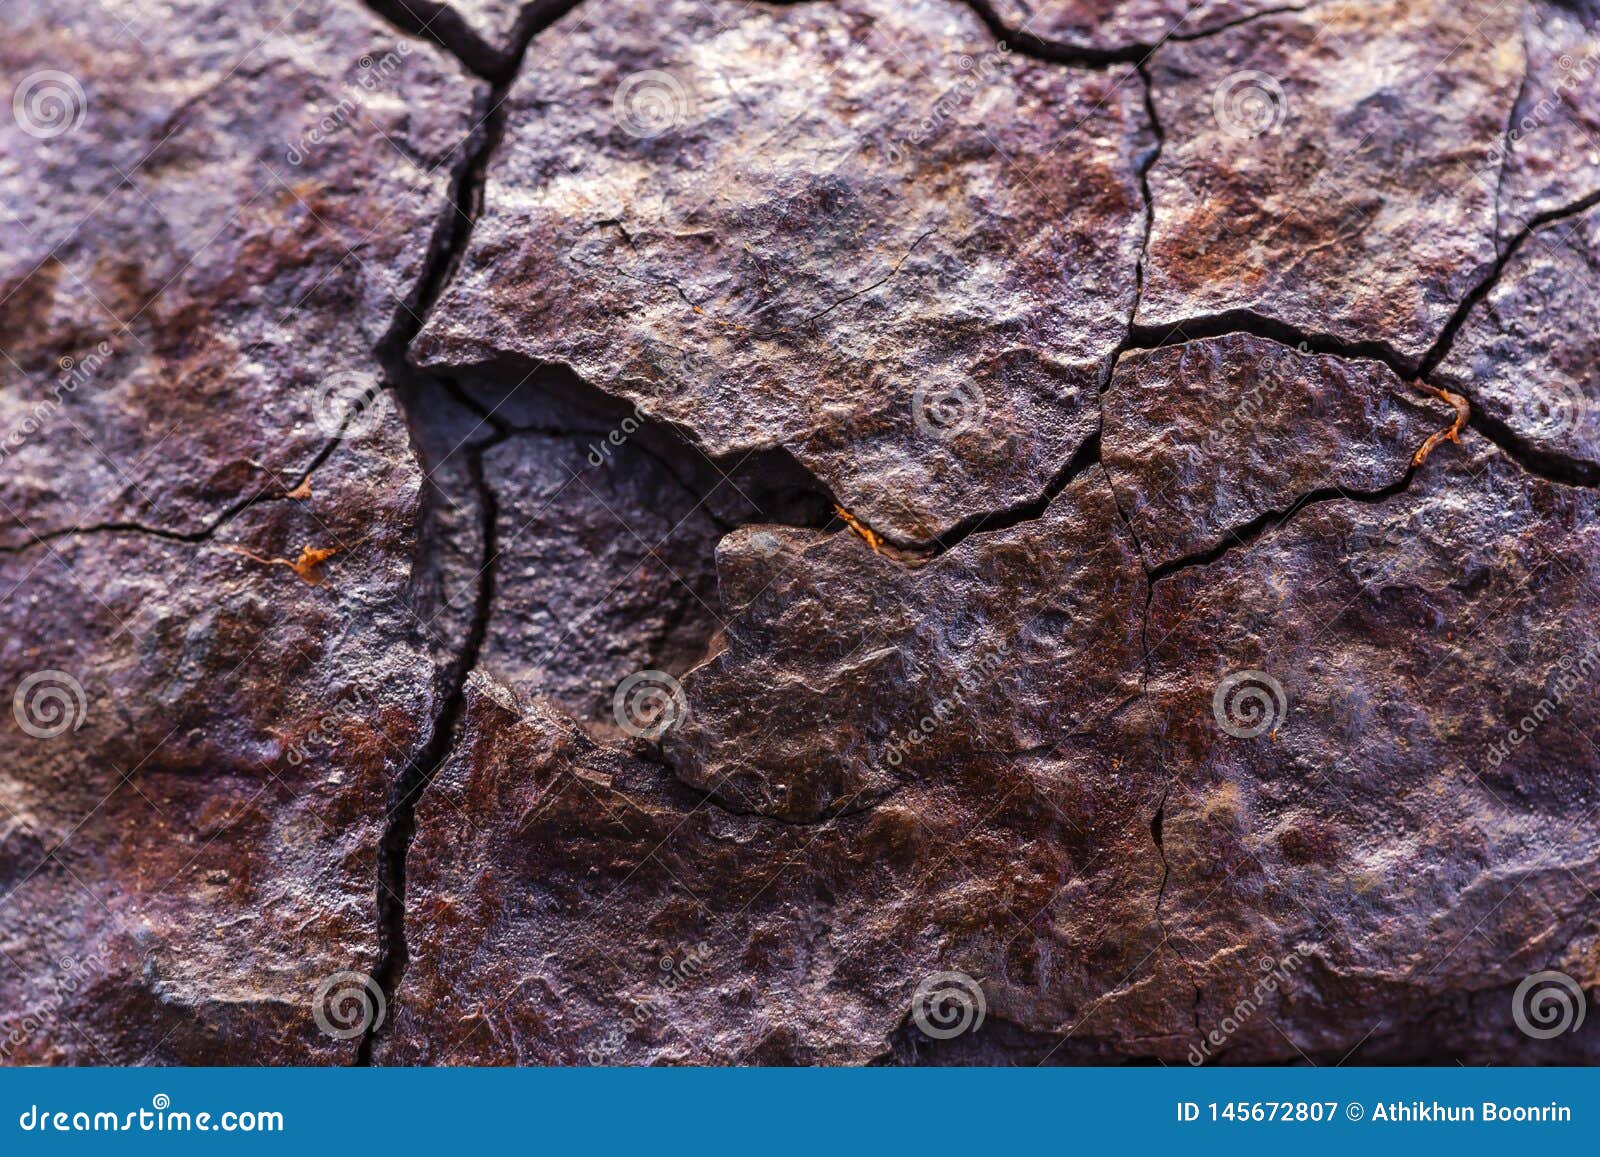 the surface of the broken metal rusts naturally.